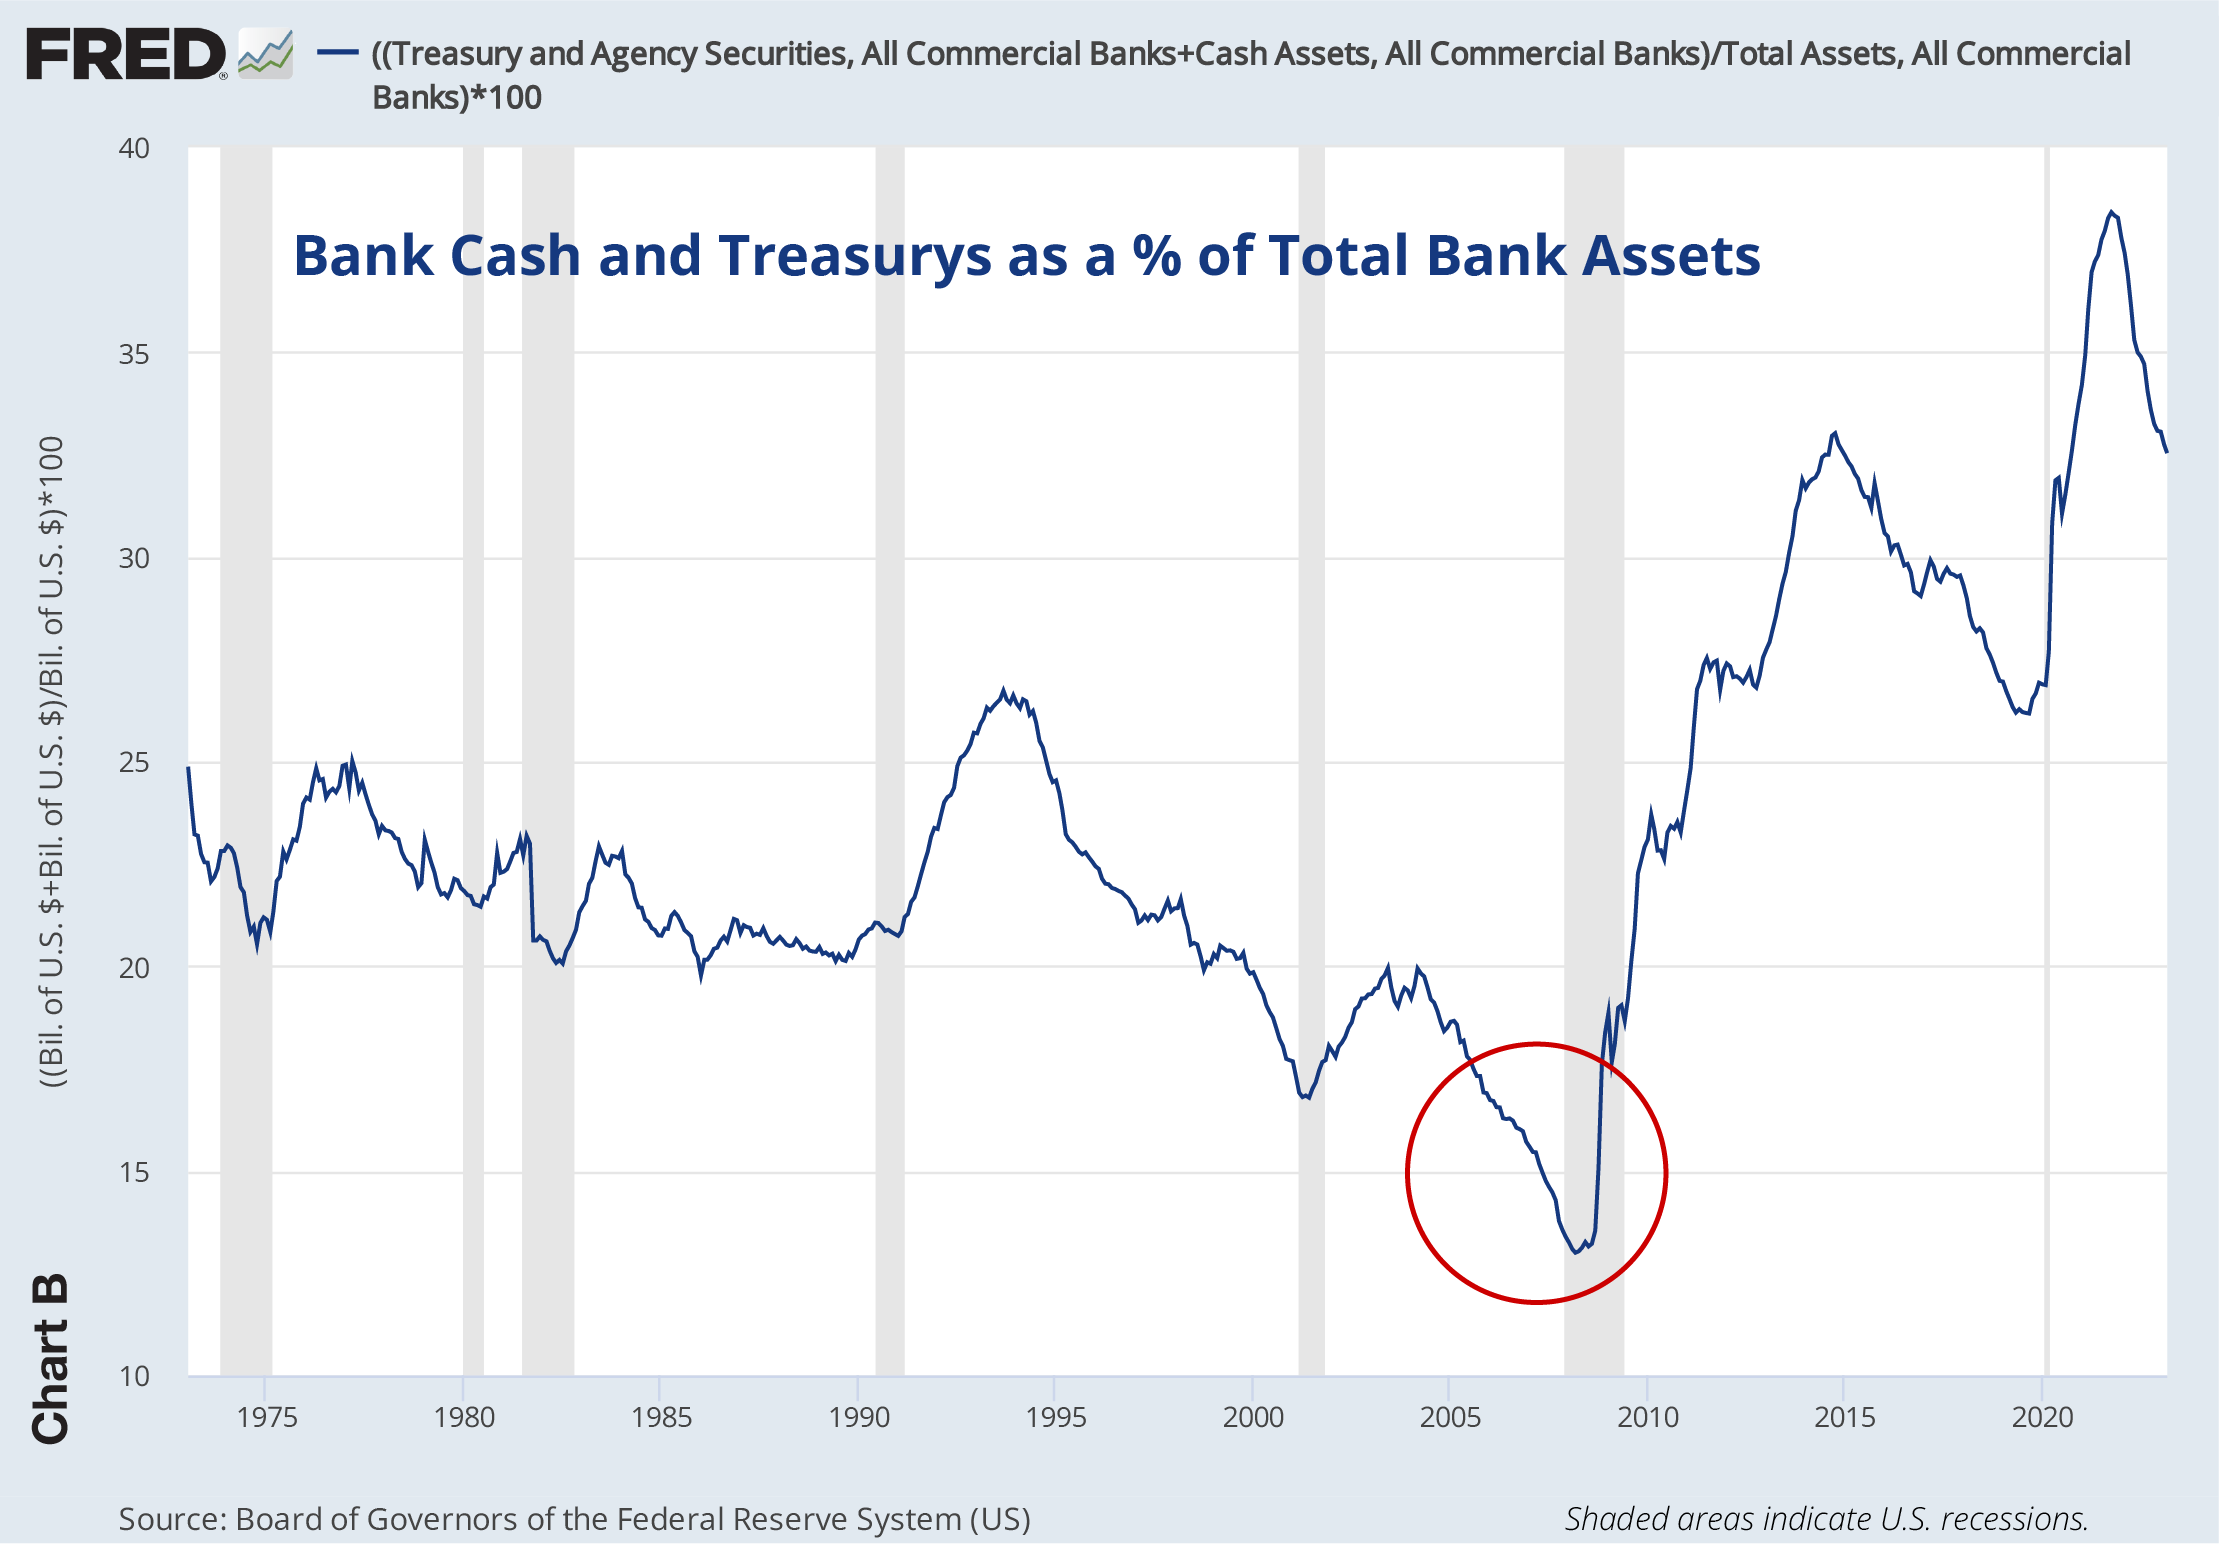 A chart showing bank cash and treasurys as a percentage of total bank assets. The chart shows data from 1975 to 2023, with particular emphasis on the dip in the chart from roughly 2005 to 2010.